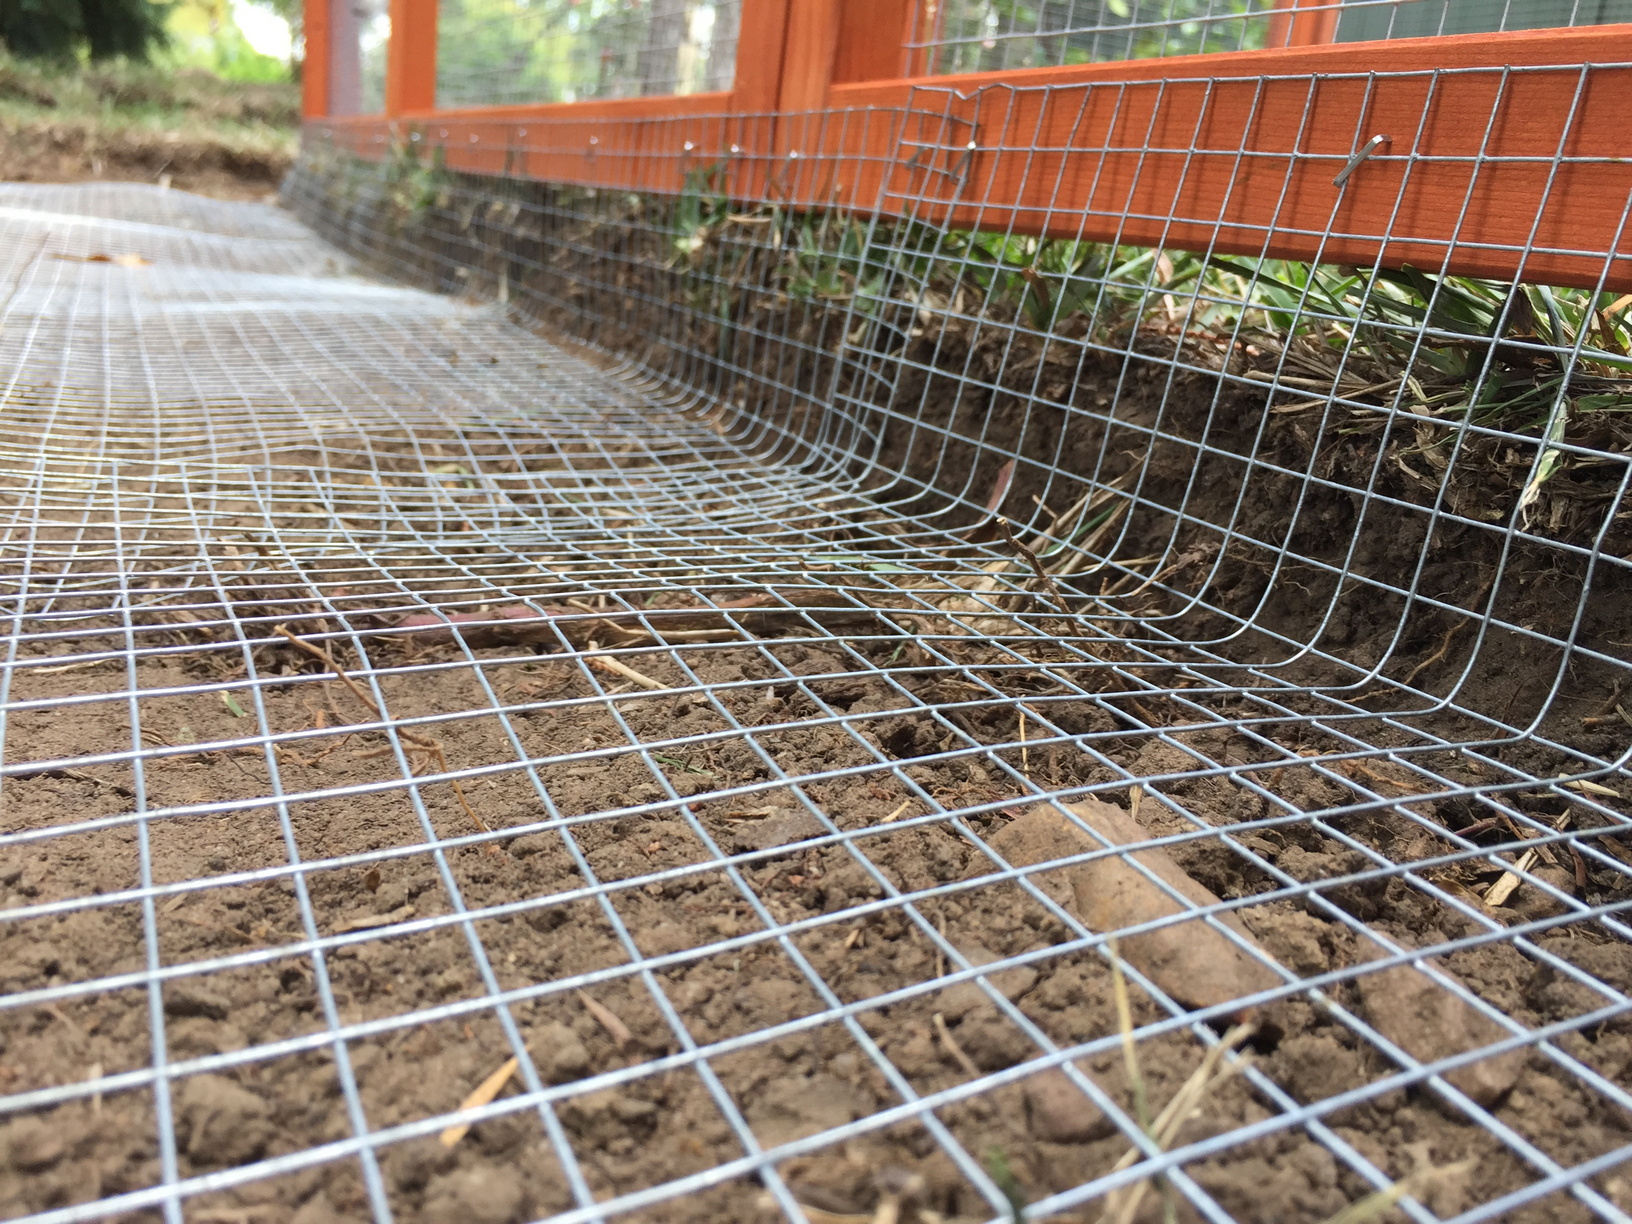 Close-up of the mesh flooring laid in the trench